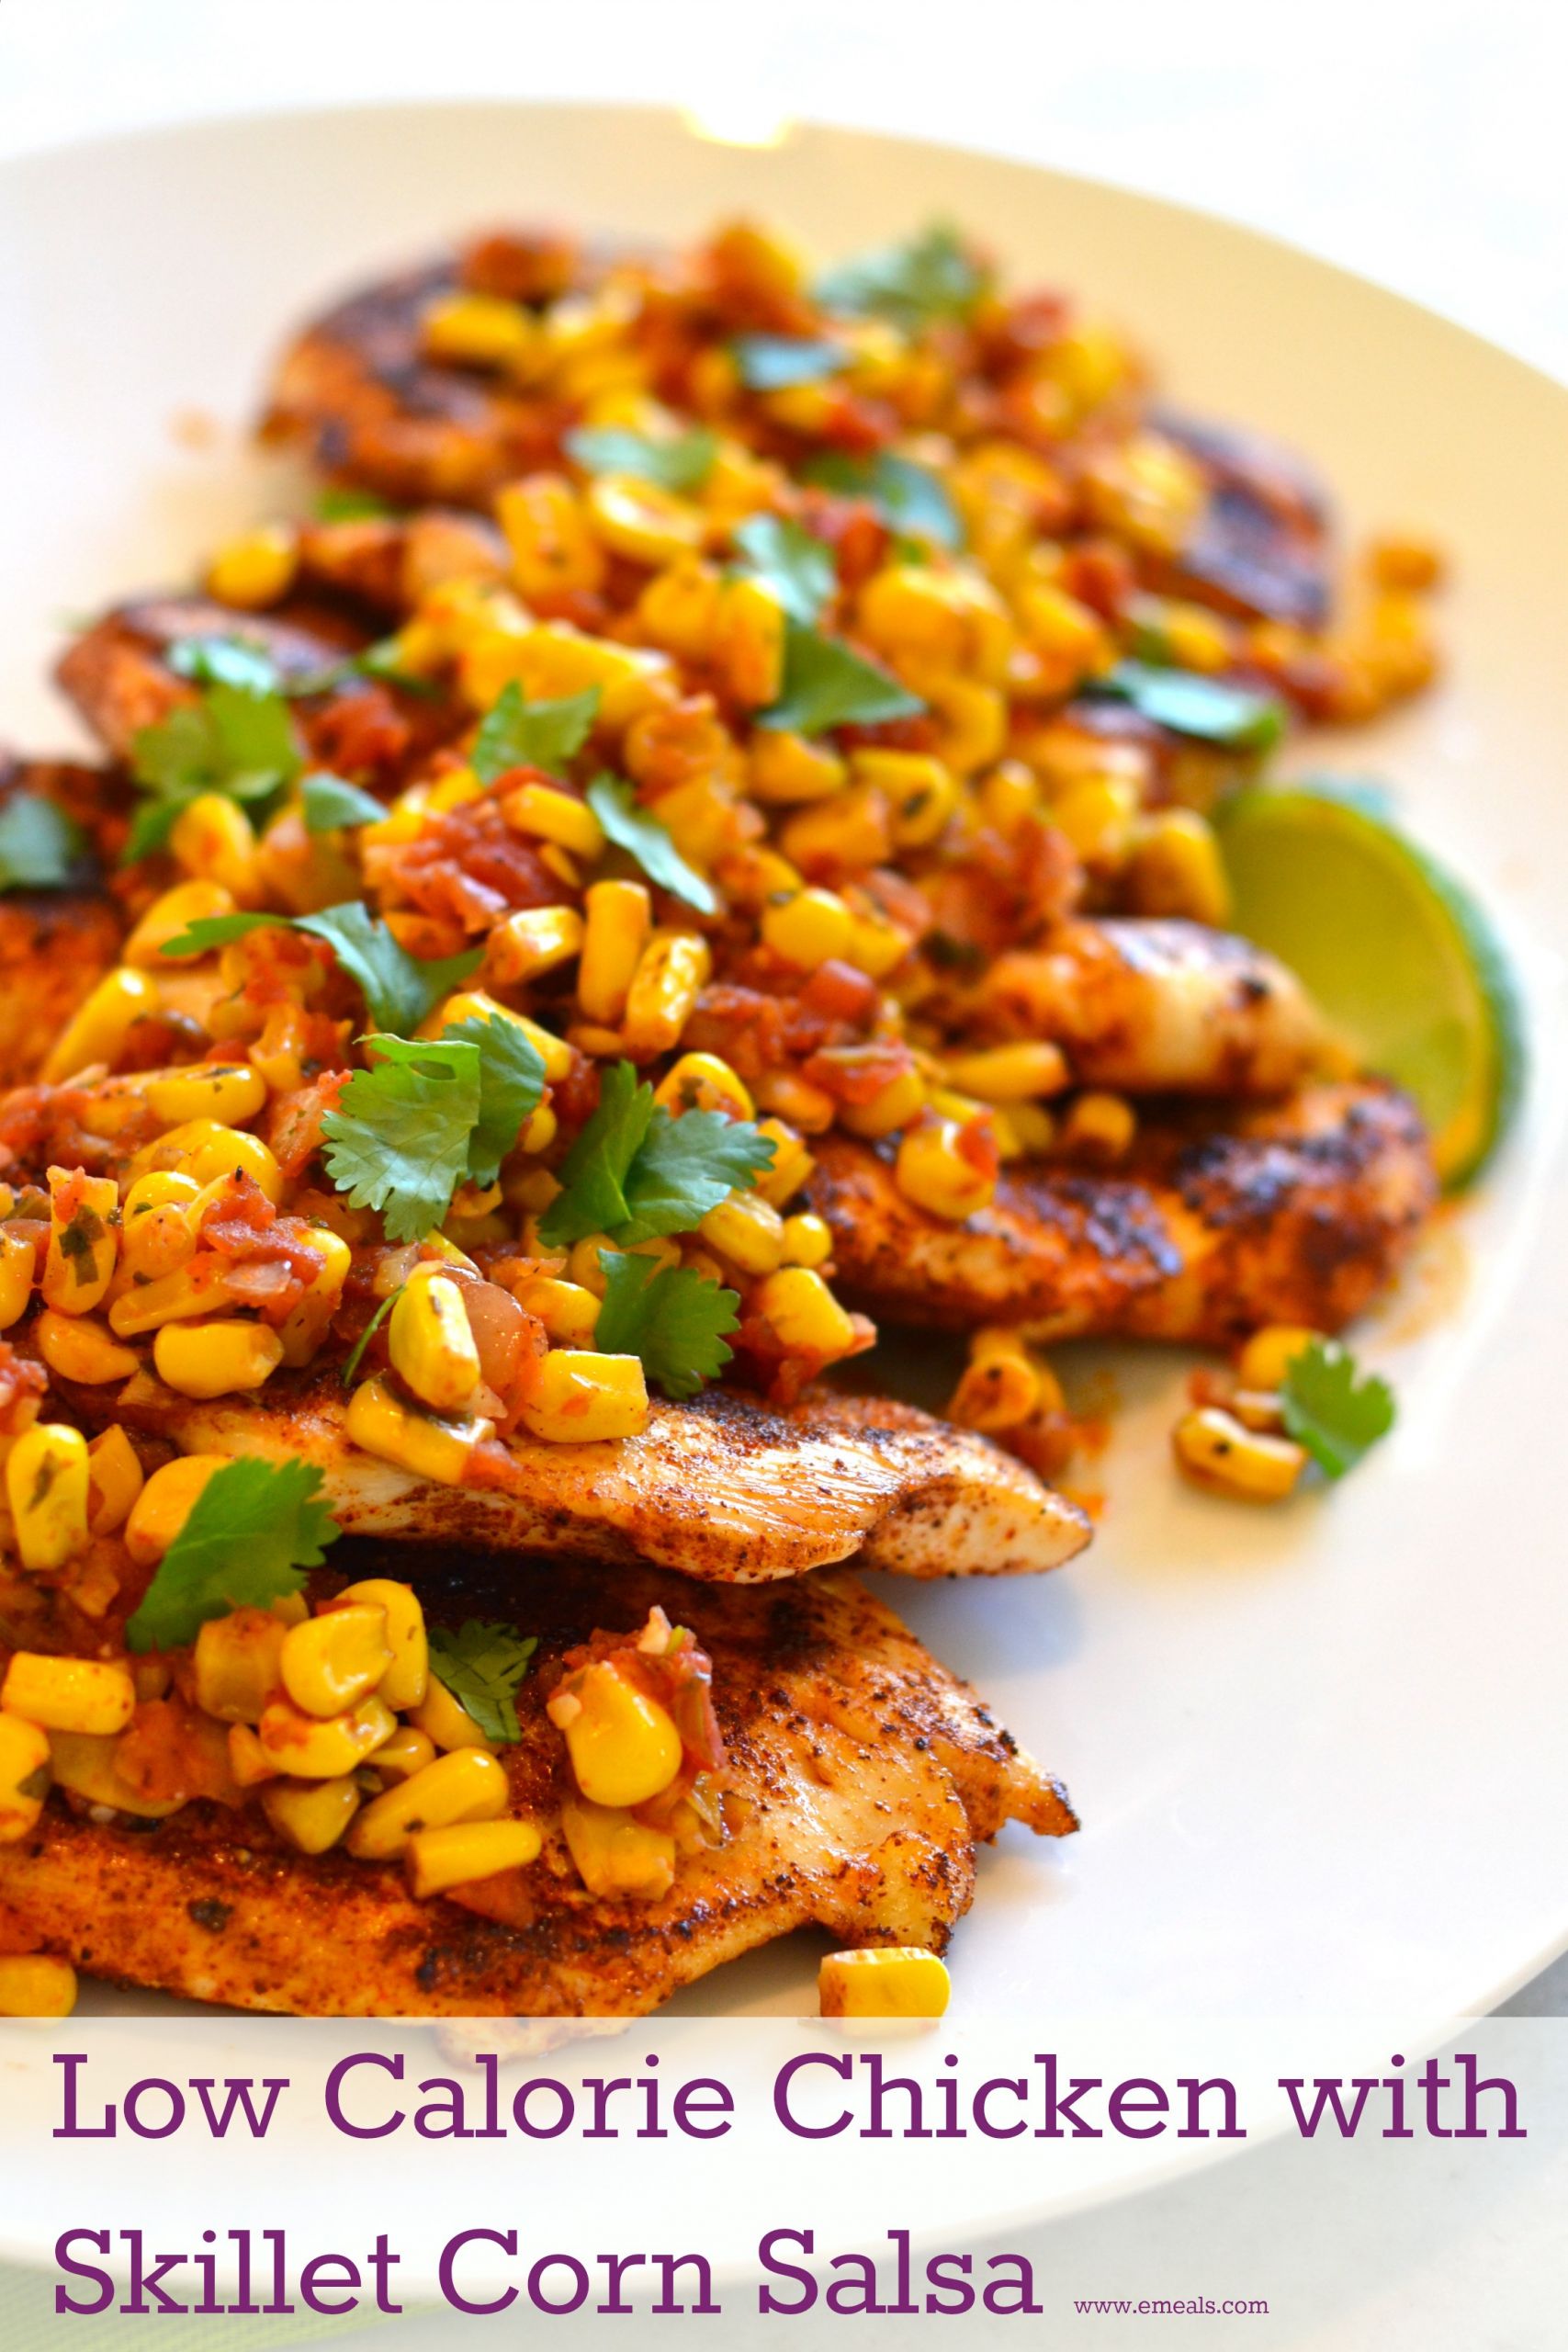 Recipes For Low Calorie Meals
 Low Calorie Dinner Recipe Spicy Chicken with Skillet Corn